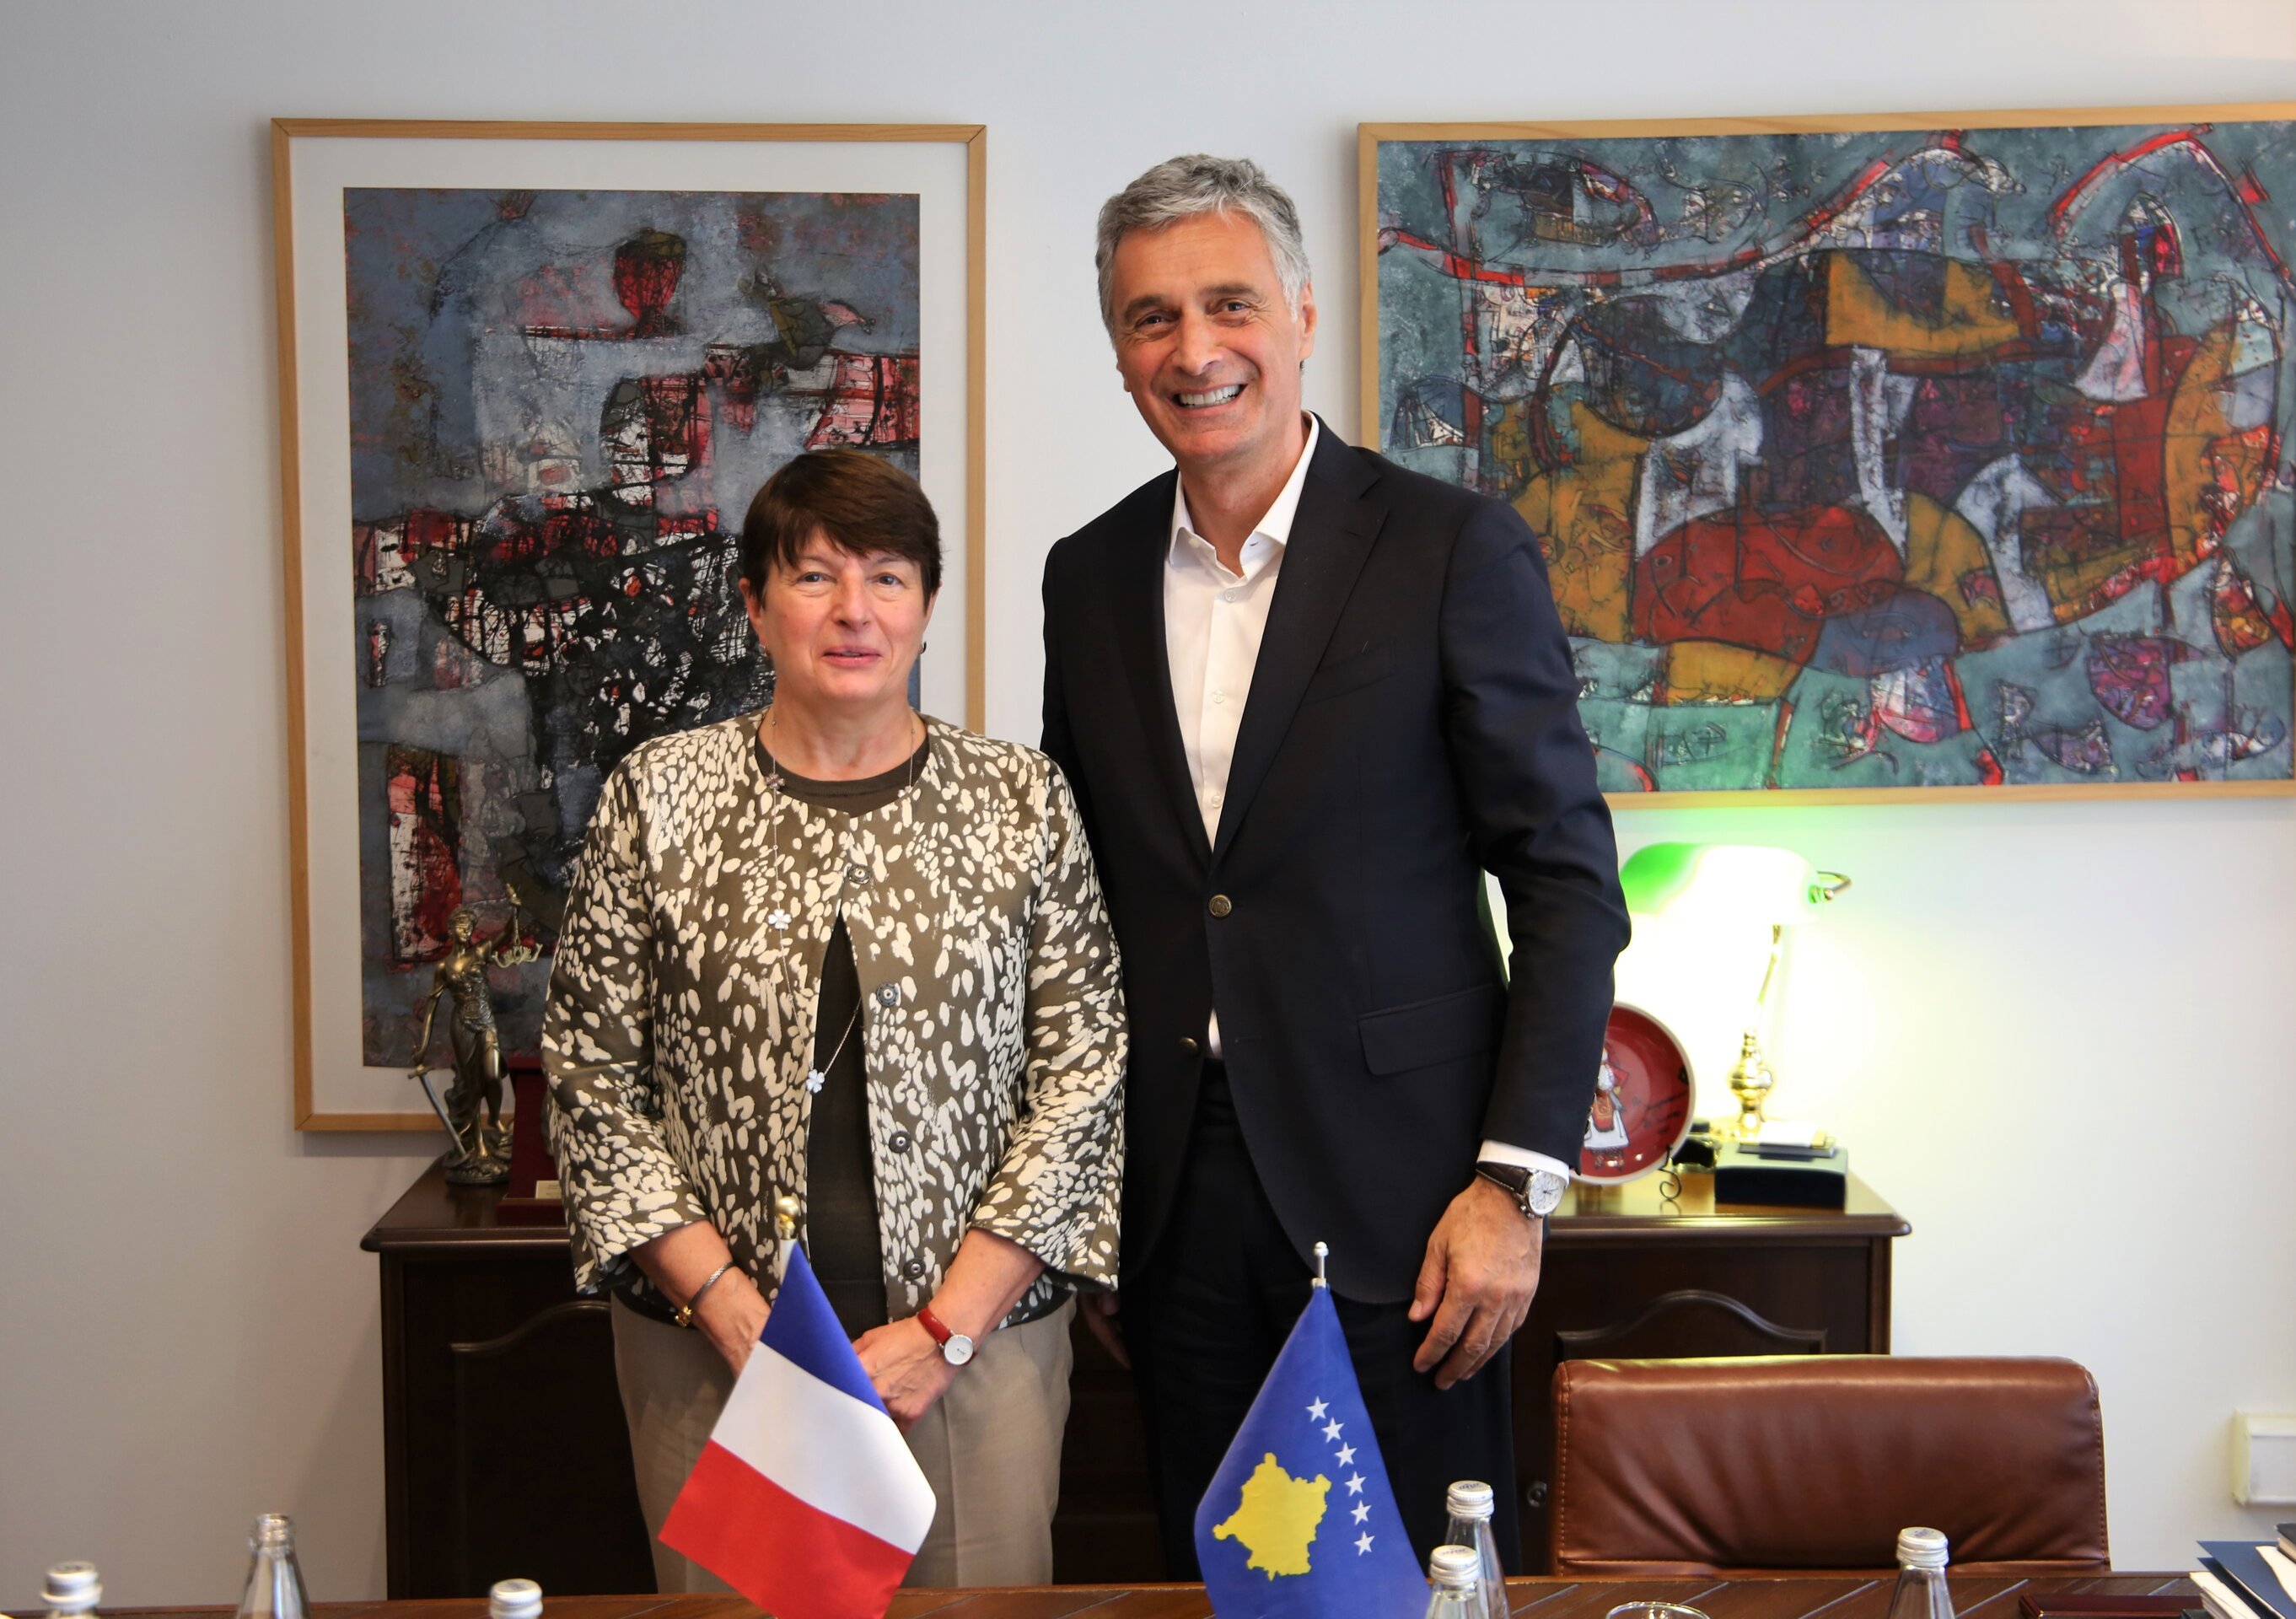 The cooperation of the State Prosecutor with the French justice institutions is appreciated